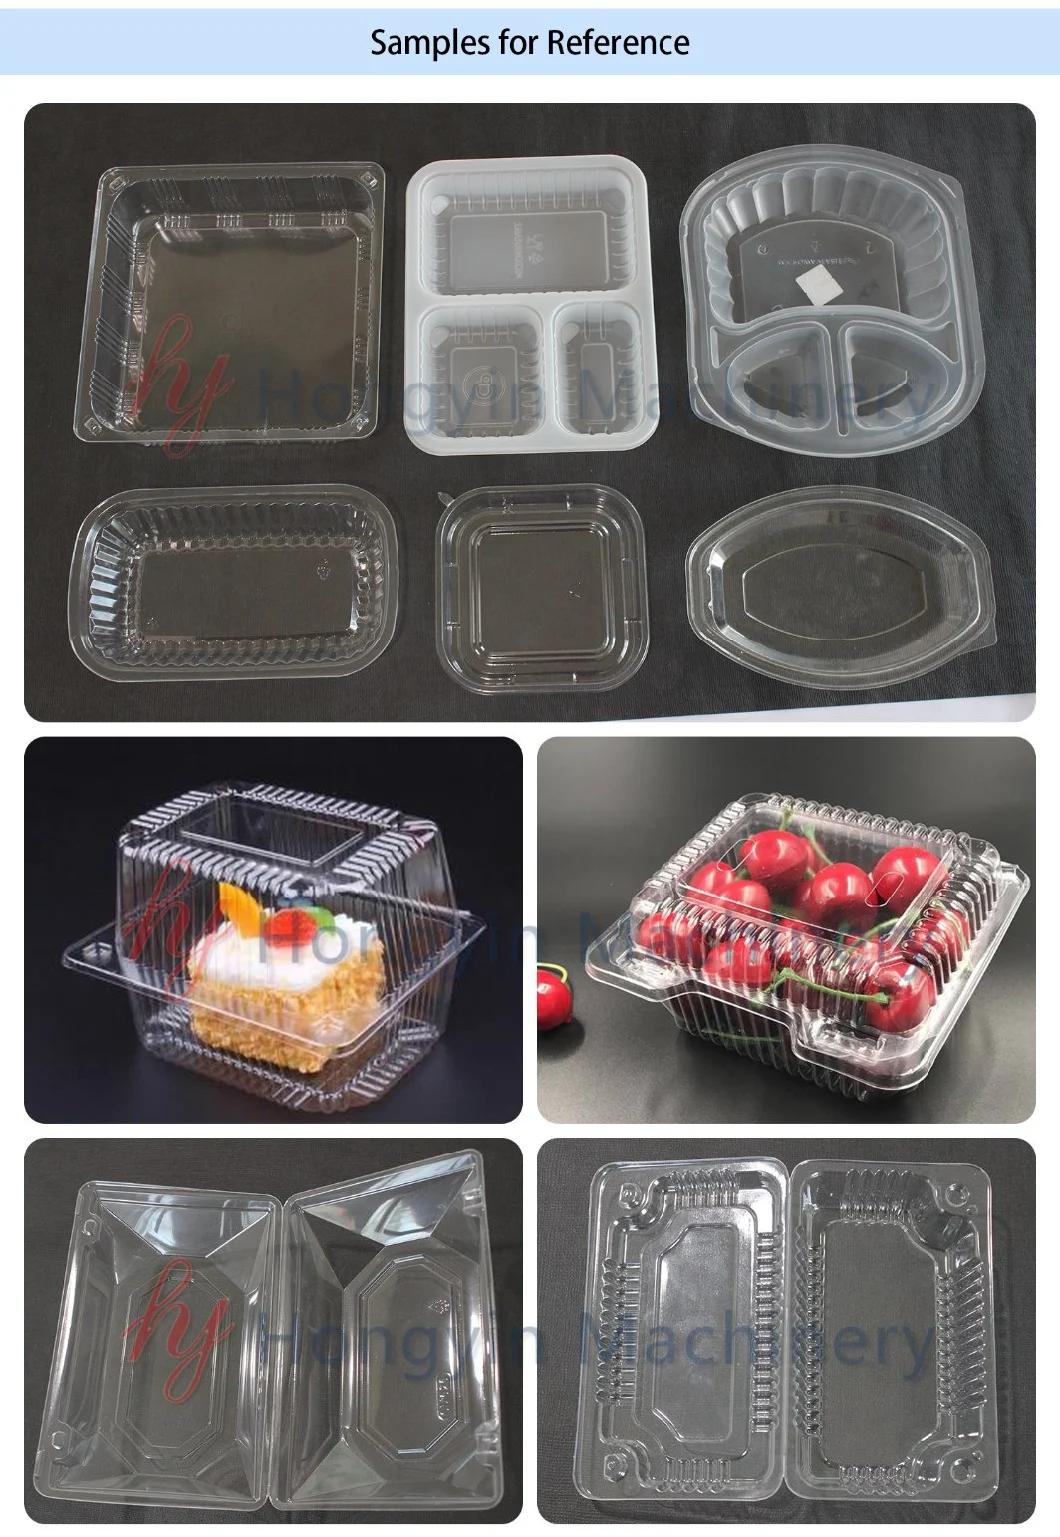 Automatic Plastic Thermoforming Boxes Making Machine